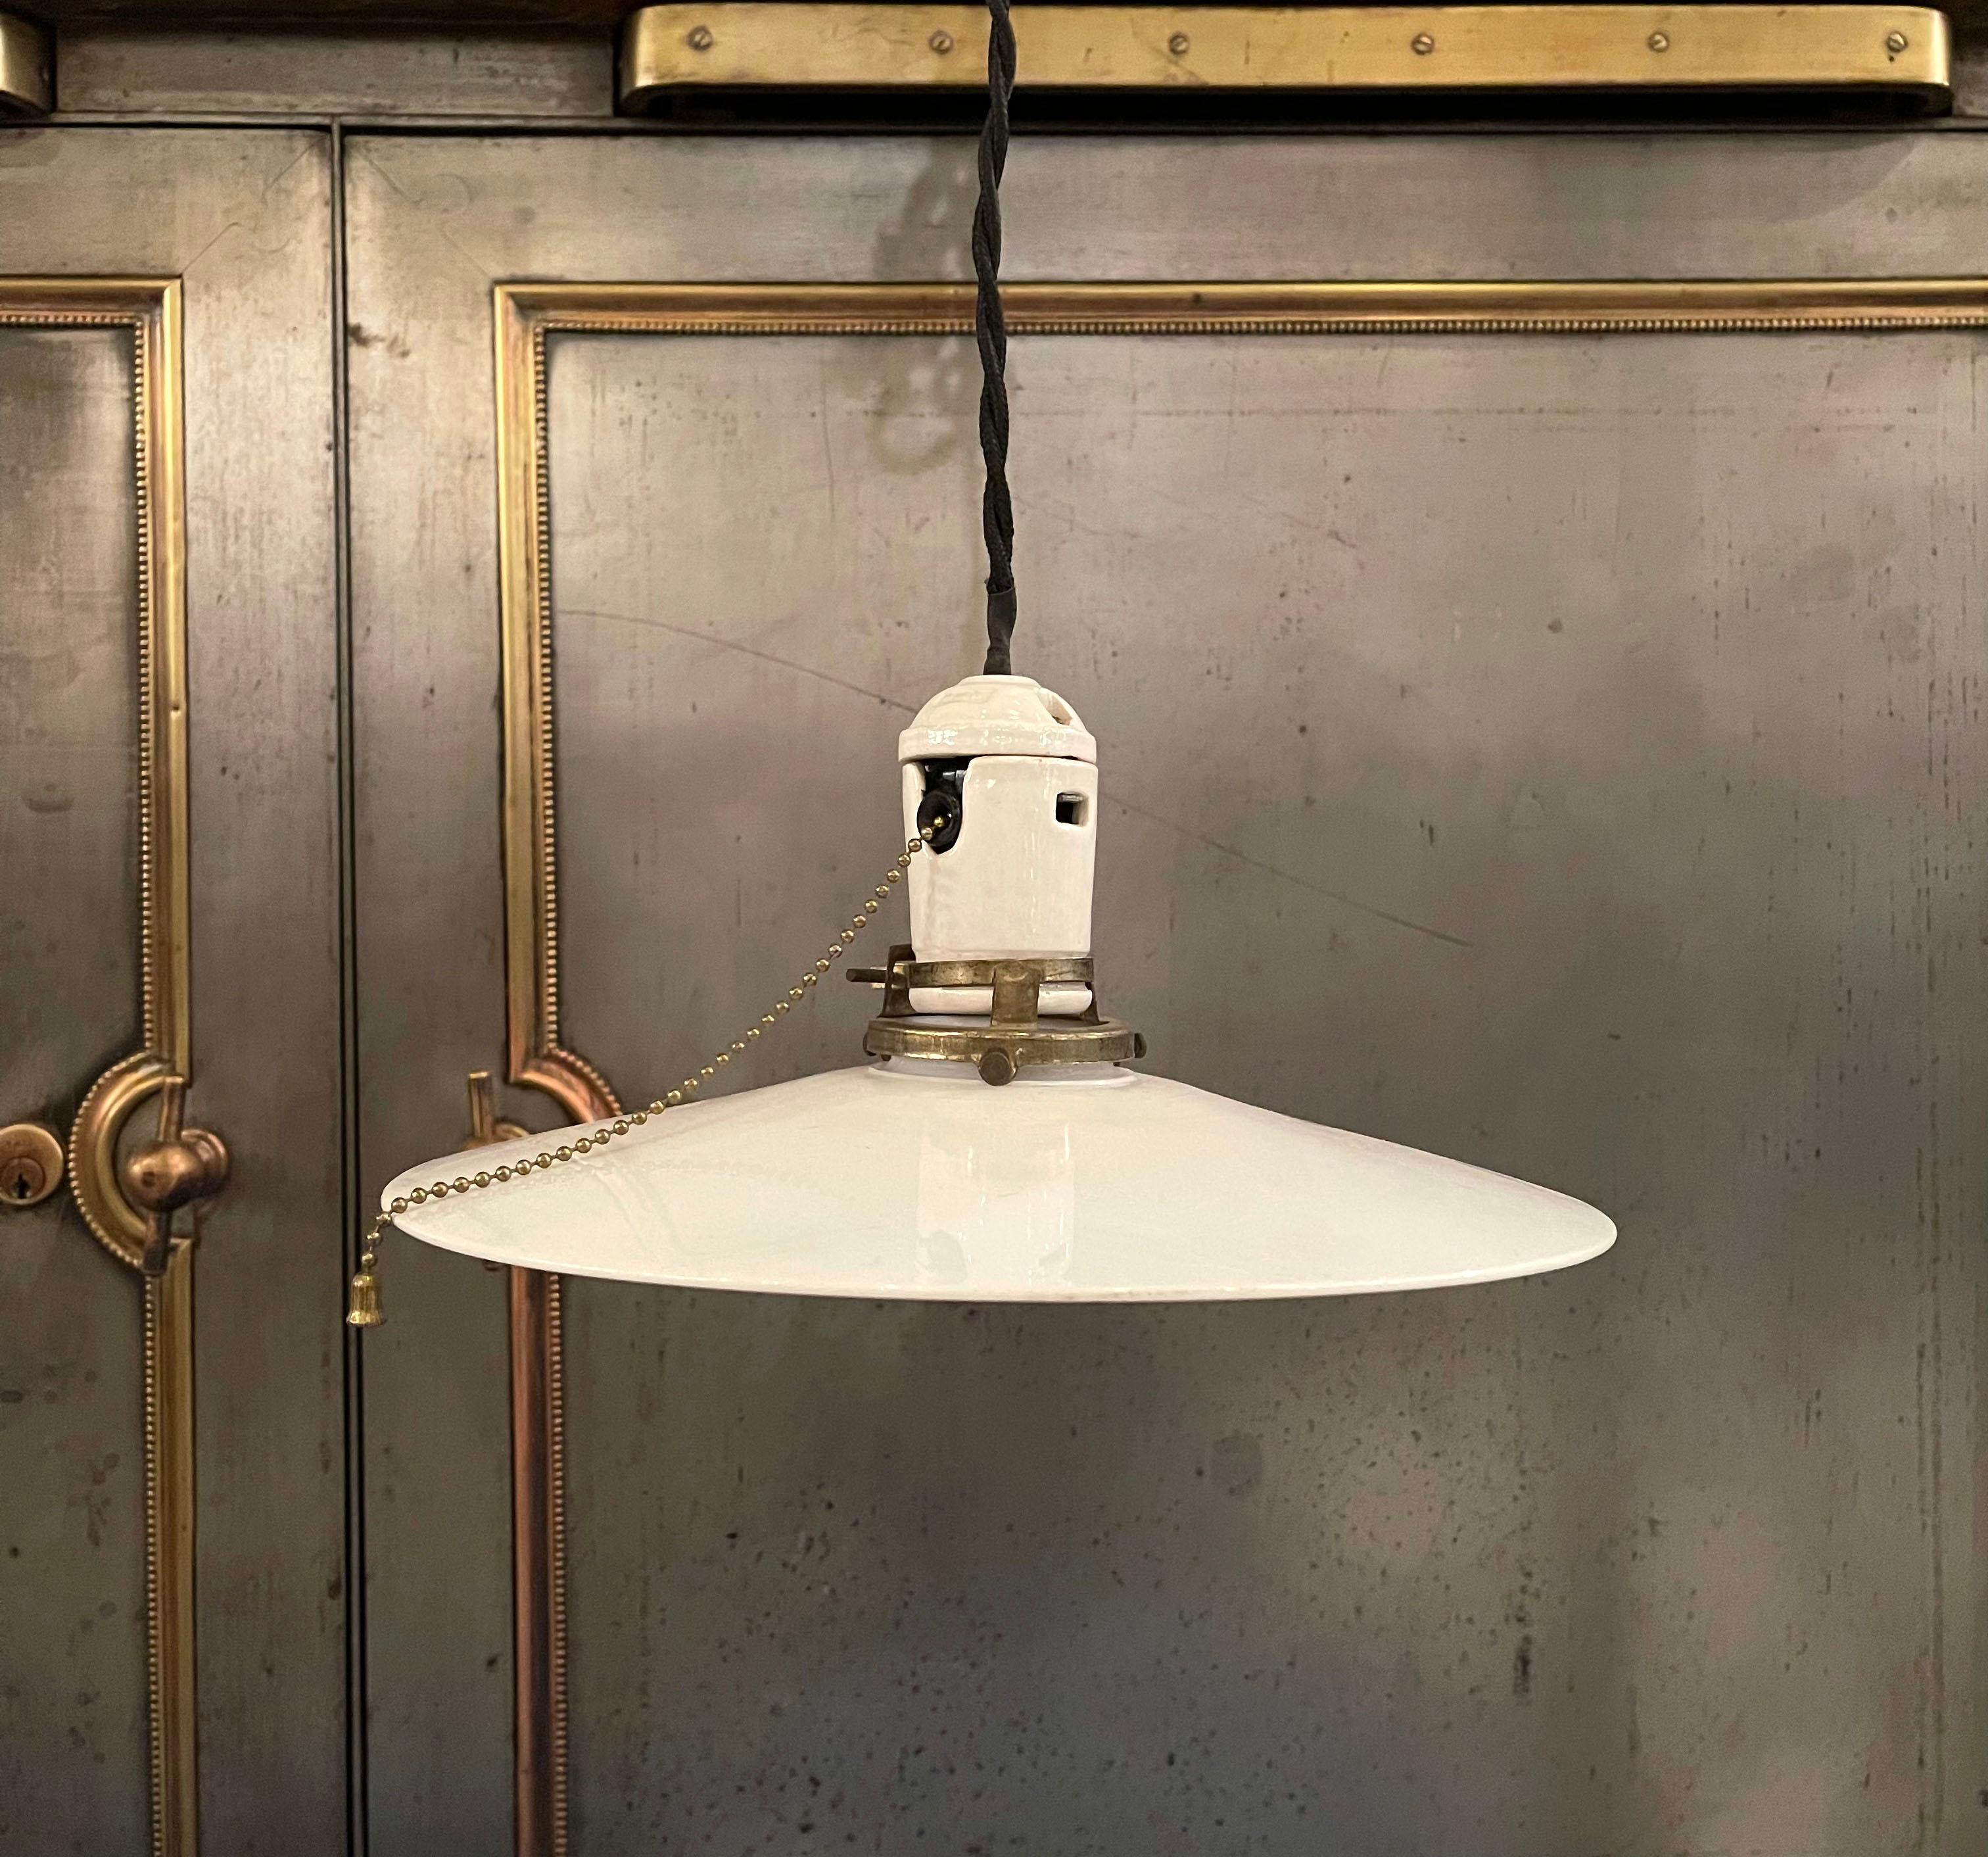 Early 20th century, industrial pendant light with 10.5 inch, hand-blown, milk glass disc shade, porcelain pull chain socket and brass fitter is newly wired with black braided cloth cord to hang at an overall lenght of 67.5 inches.